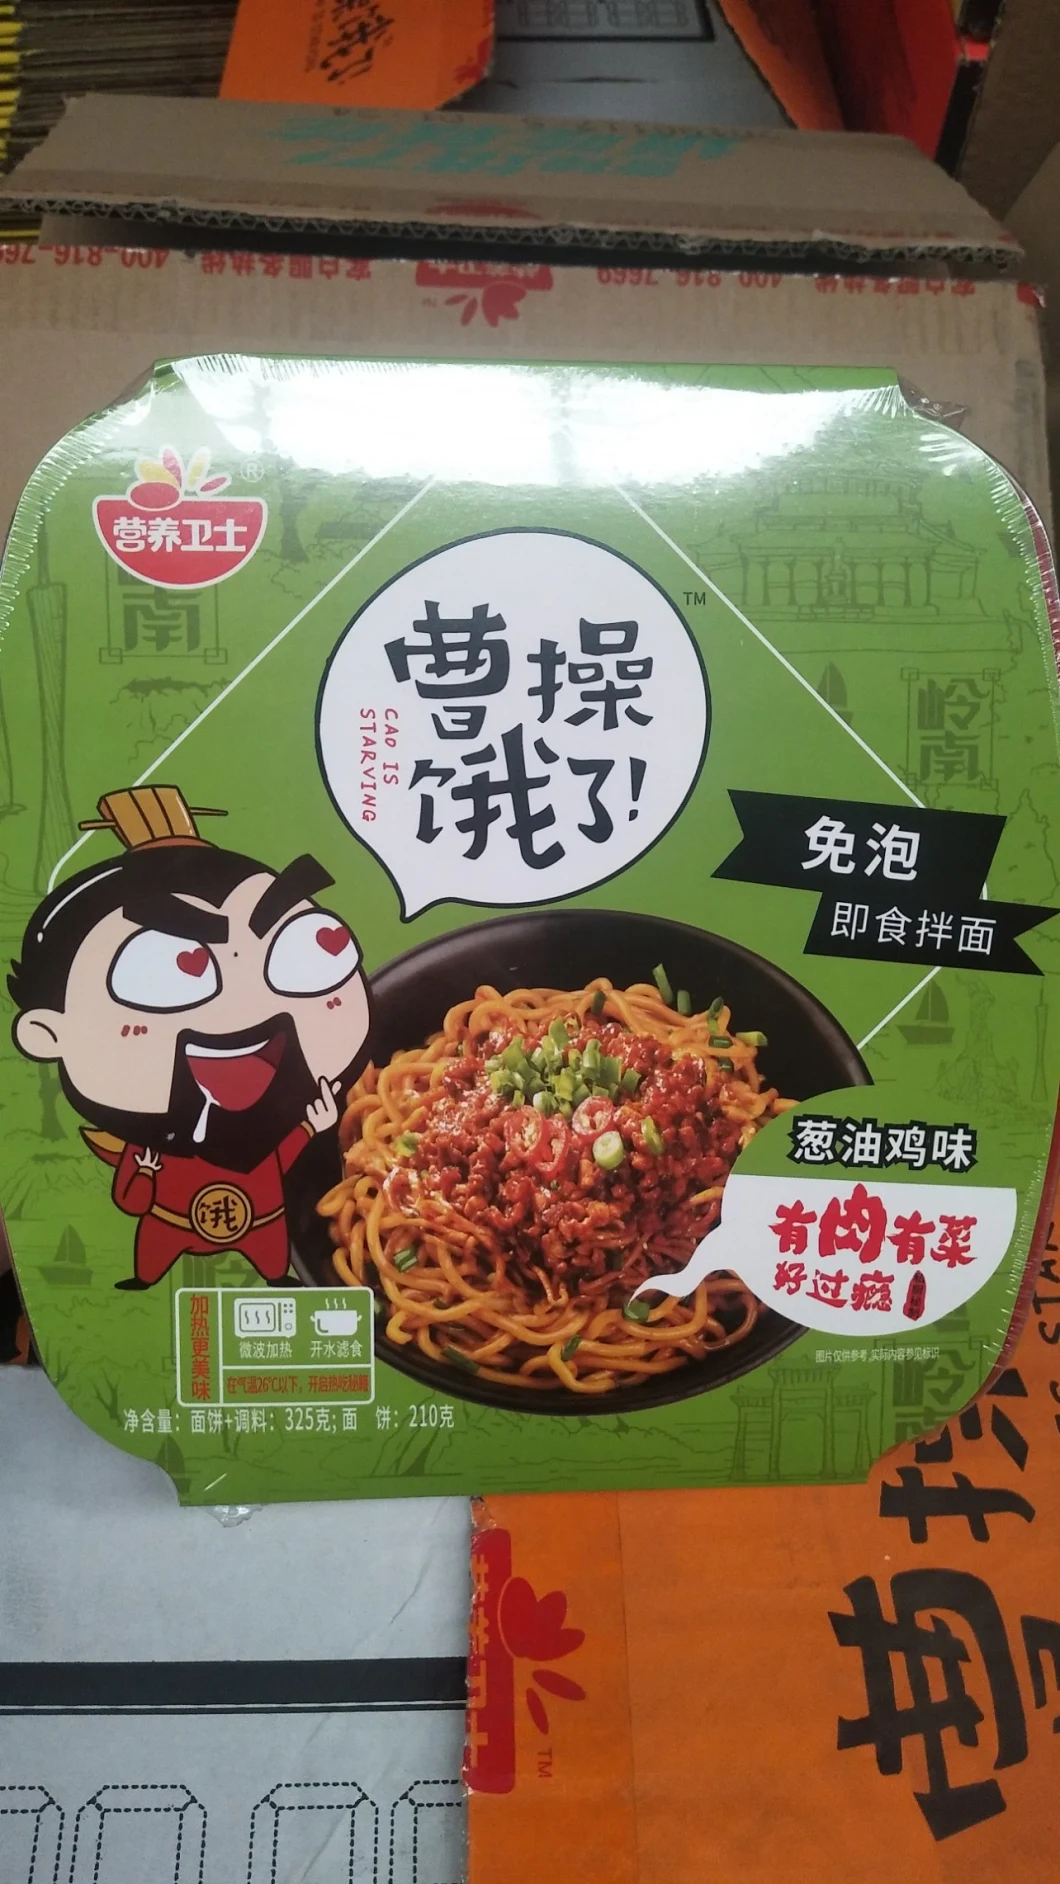 Health Food High-End Scallion Instant Noodles Ramen with Sauce Hot Sealing